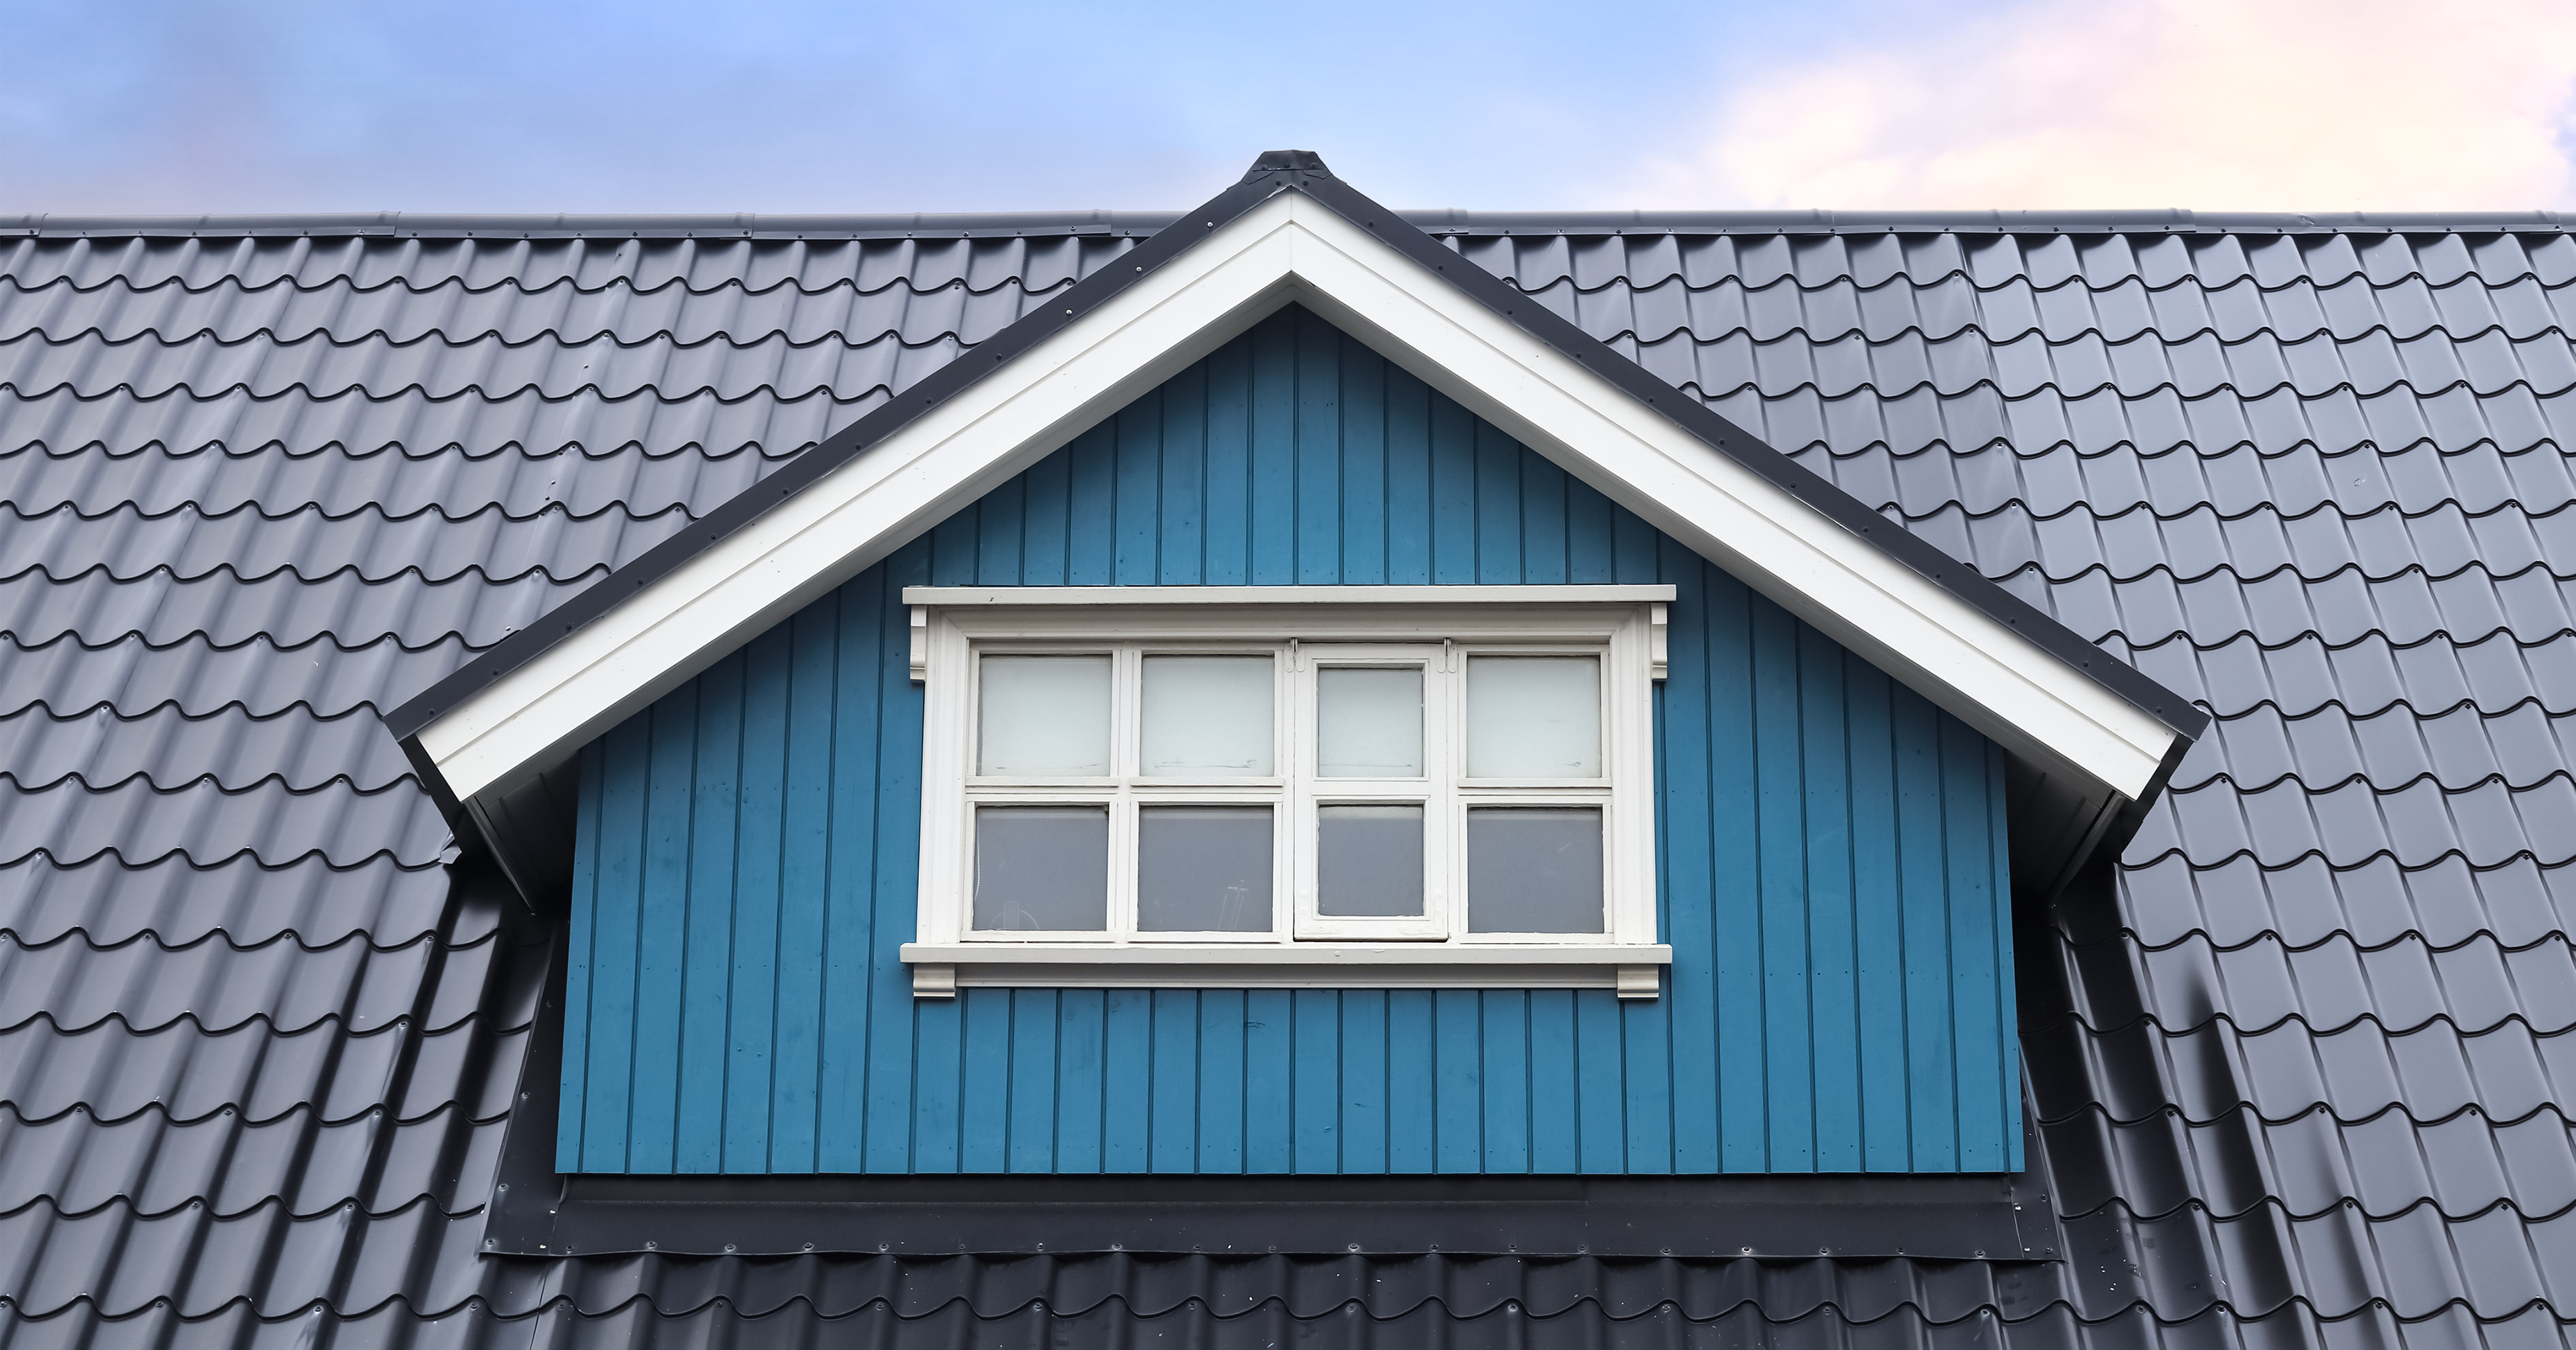 How to decide if dormers are right for your home